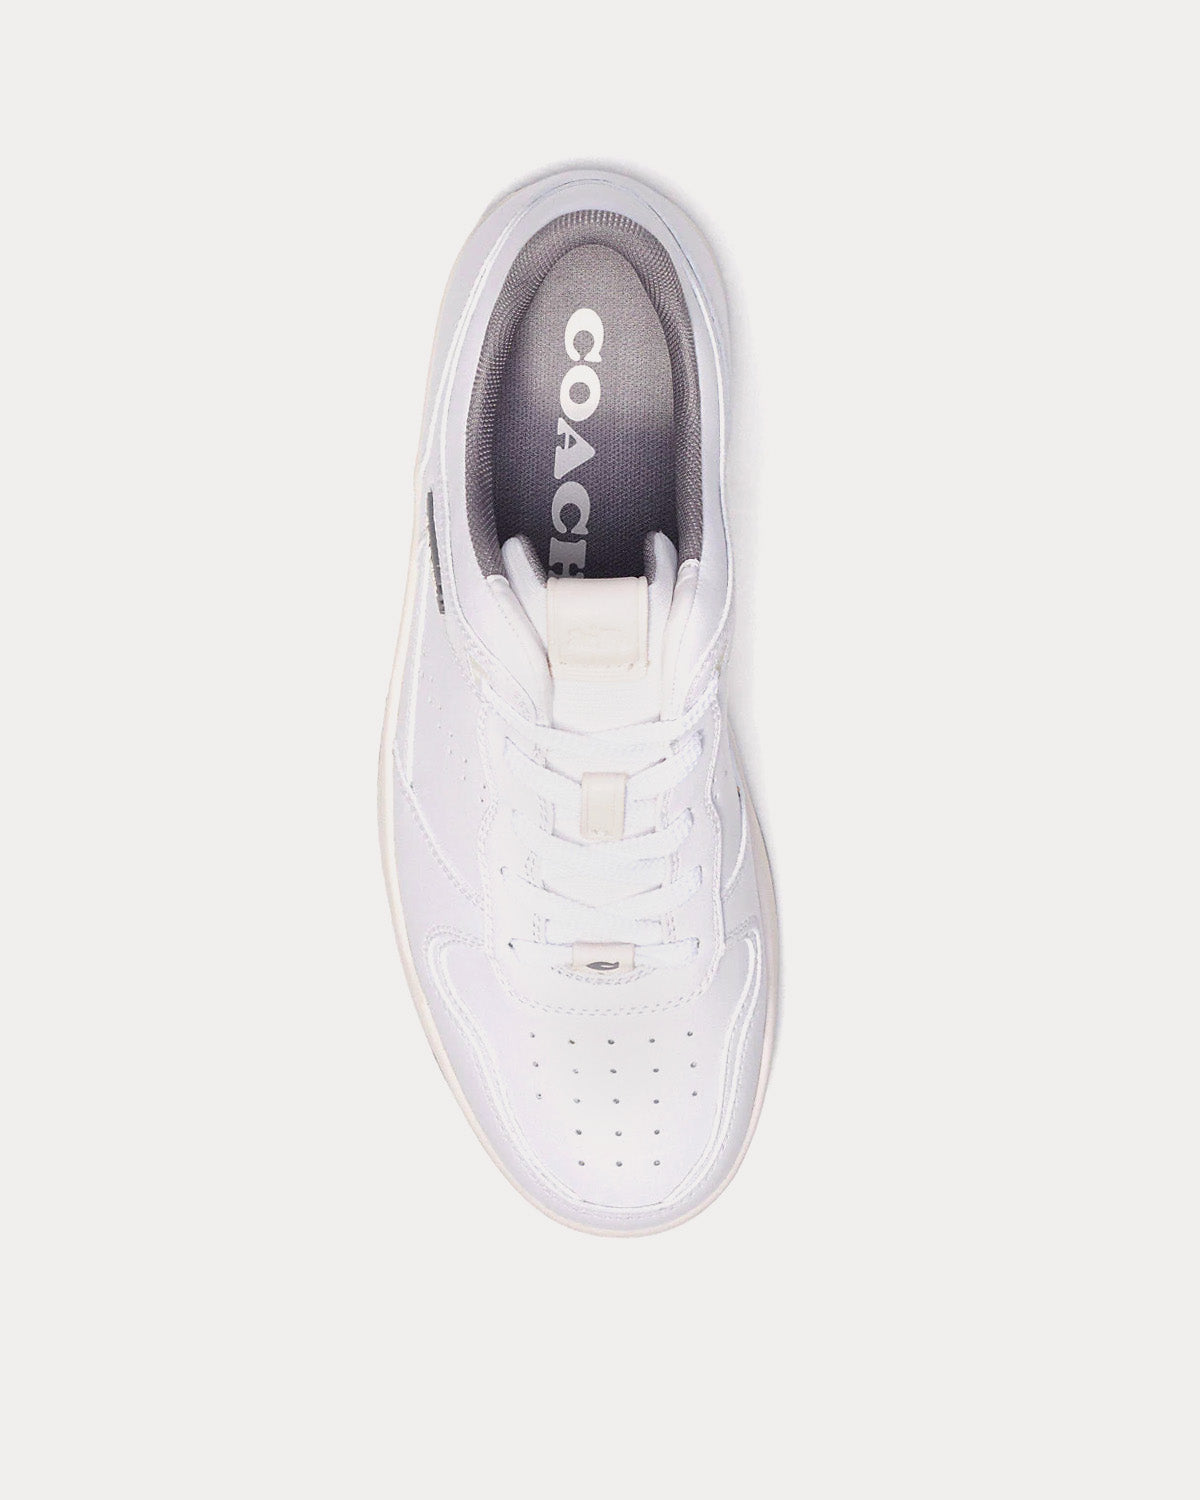 Coach - C201 Optic White / Heather Grey Low Top Sneakers